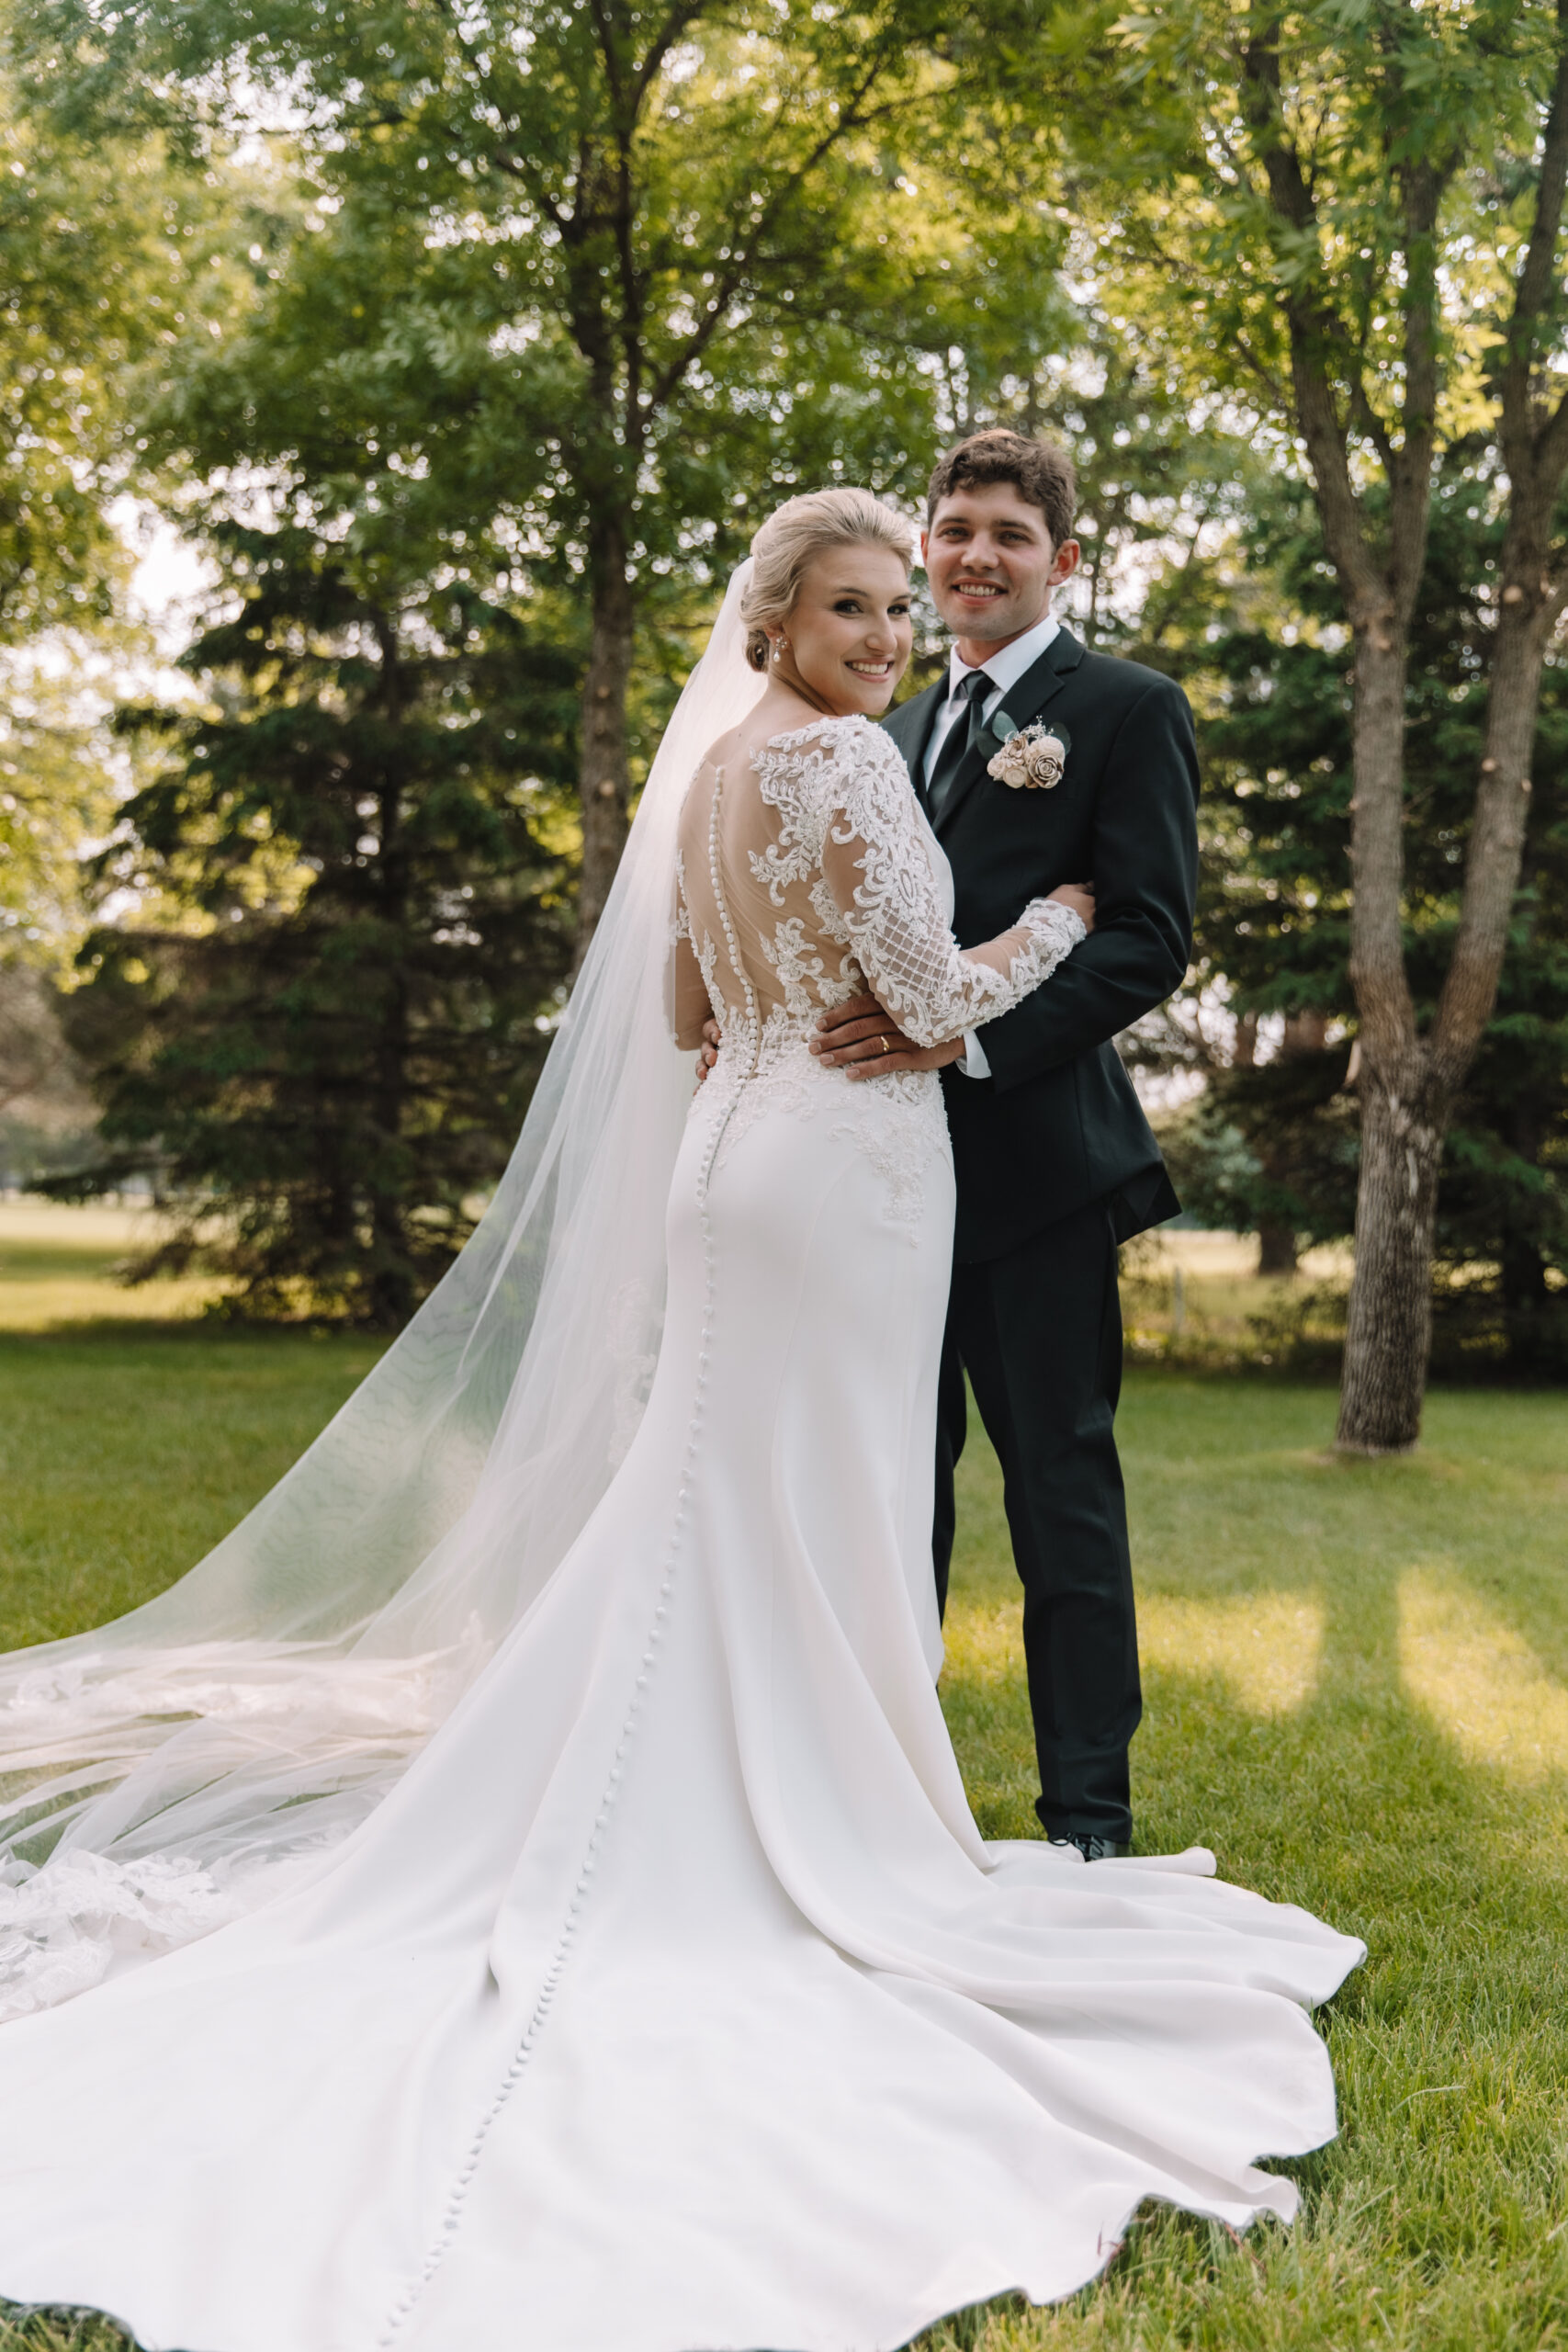 Bride and Groom Portrait photo with bride's beautiful long train and open back lace wedding dress after their first look